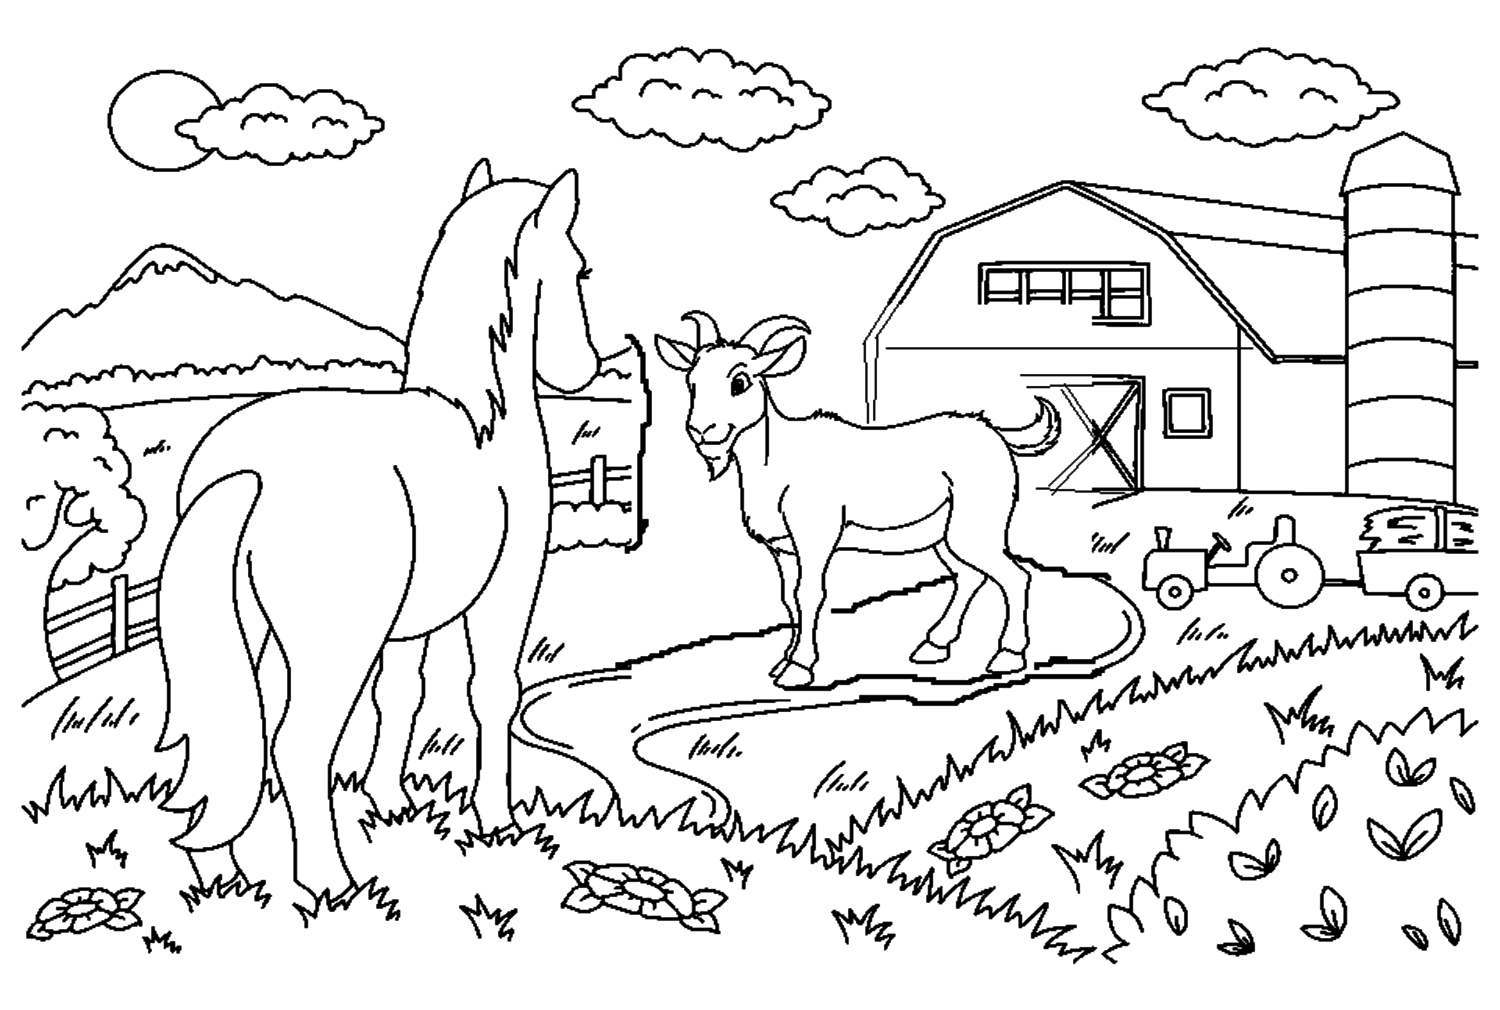 Cute Horse And Farm Animals Coloring Page - Free Printable Coloring Pages